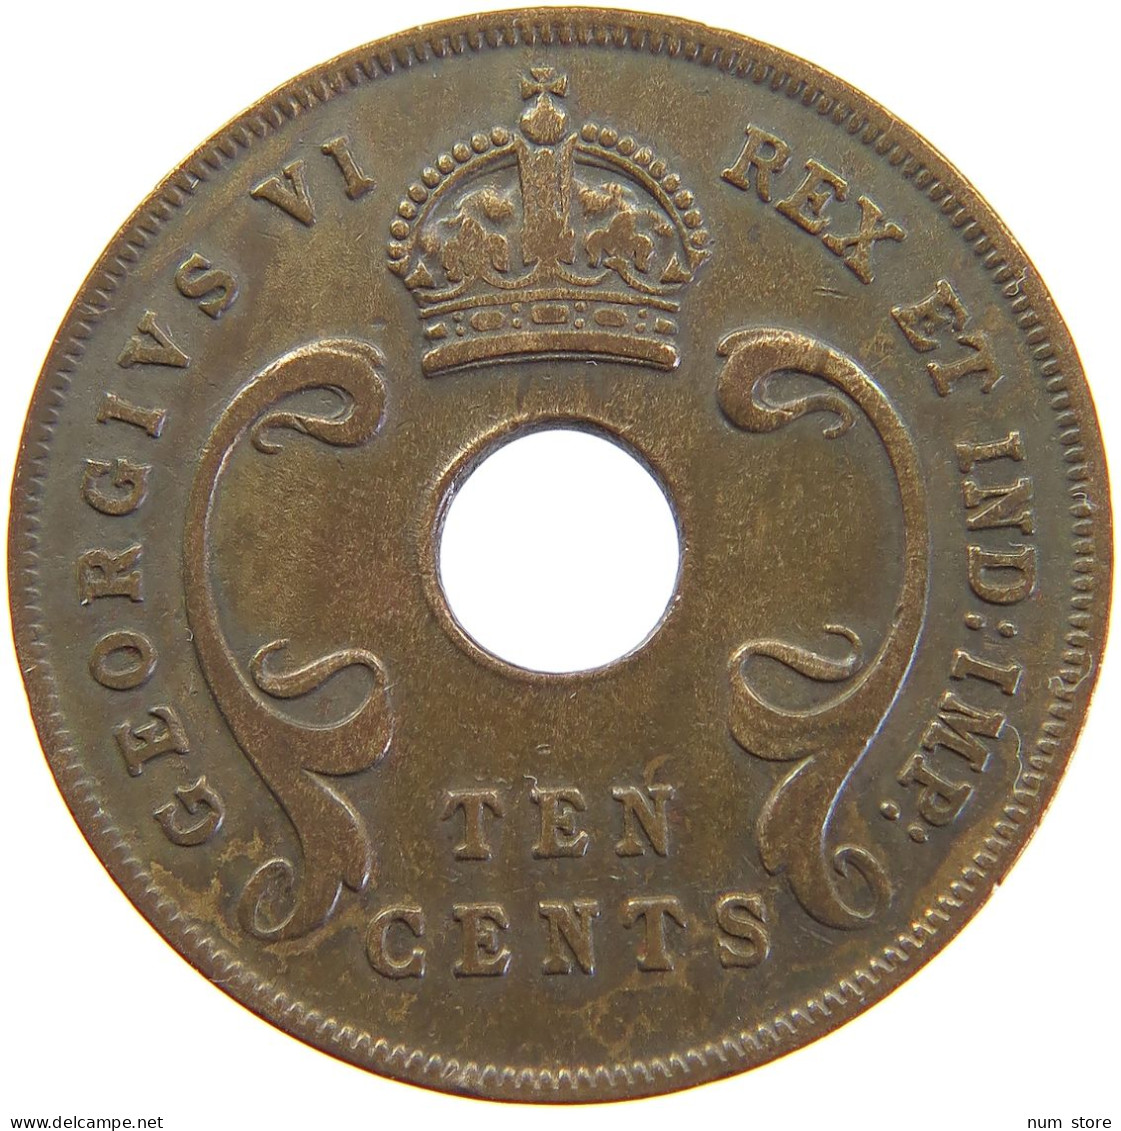 EAST AFRICA 10 CENTS 1941 GEORGE V. (1910-1936) #MA 067723 - Colonie Britannique